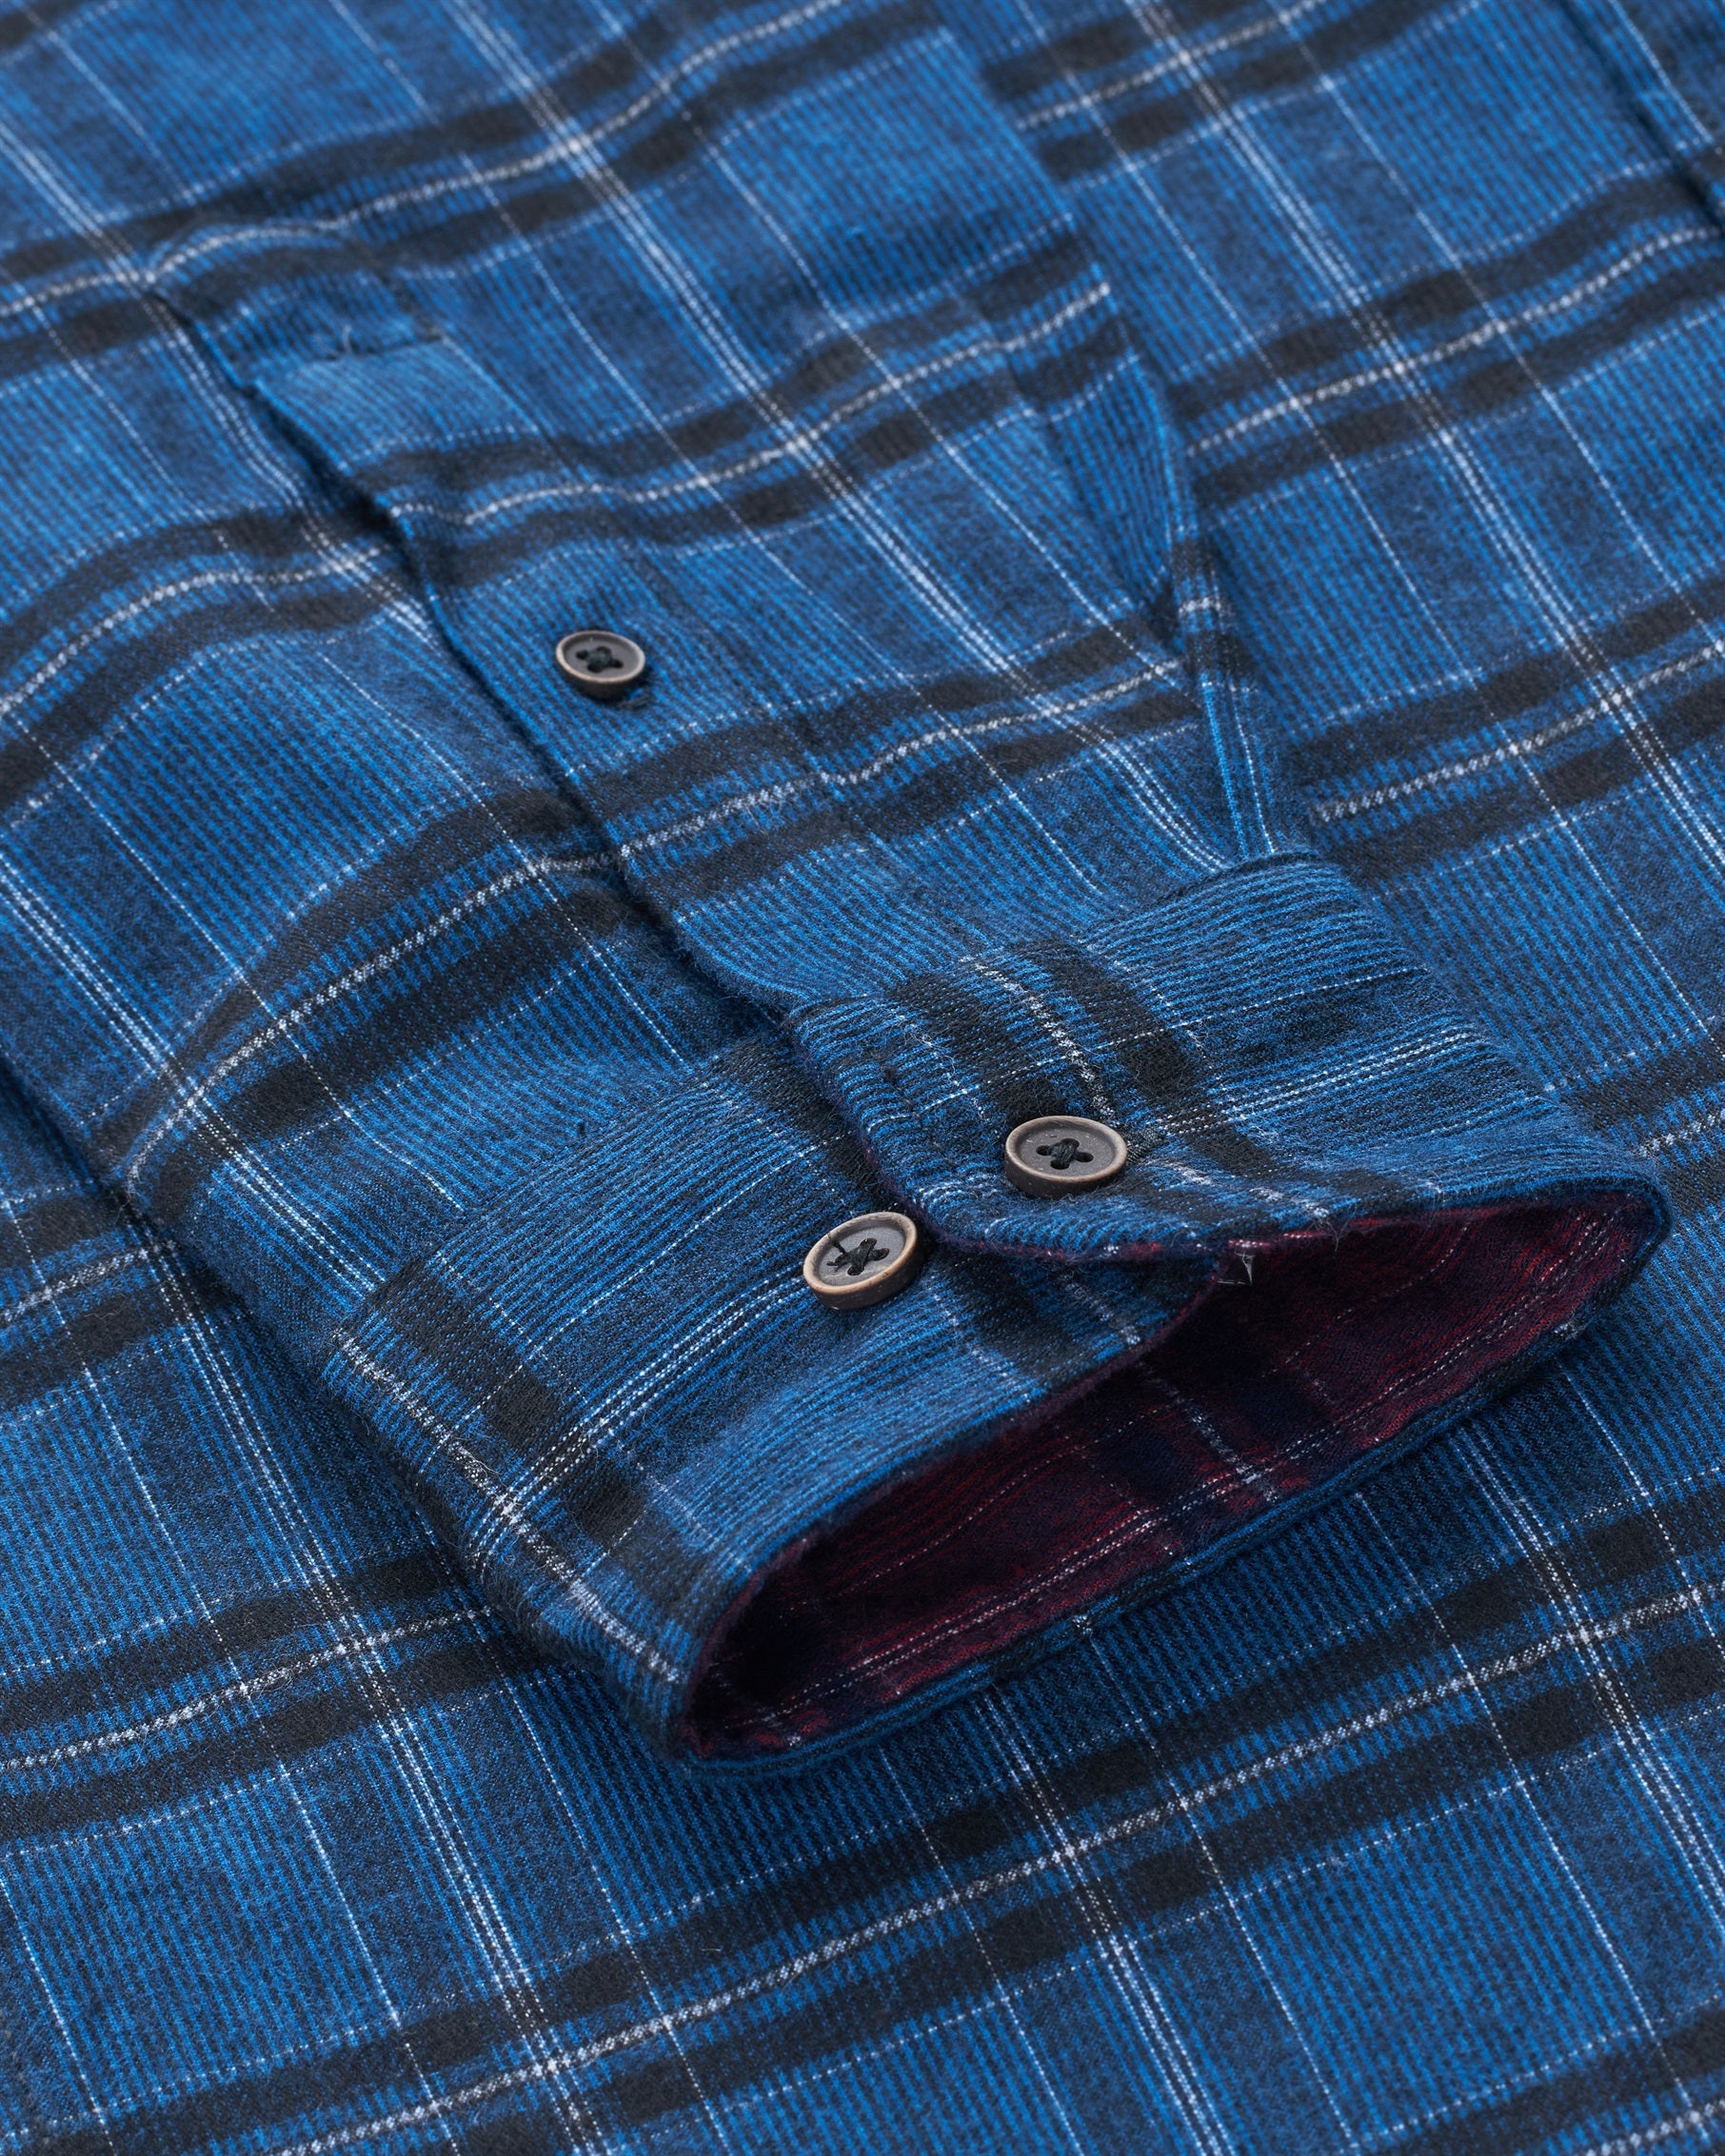 Bare Brown Corduroy Check Cotton Shirt, Slim Fit with Full Sleeves - Blue